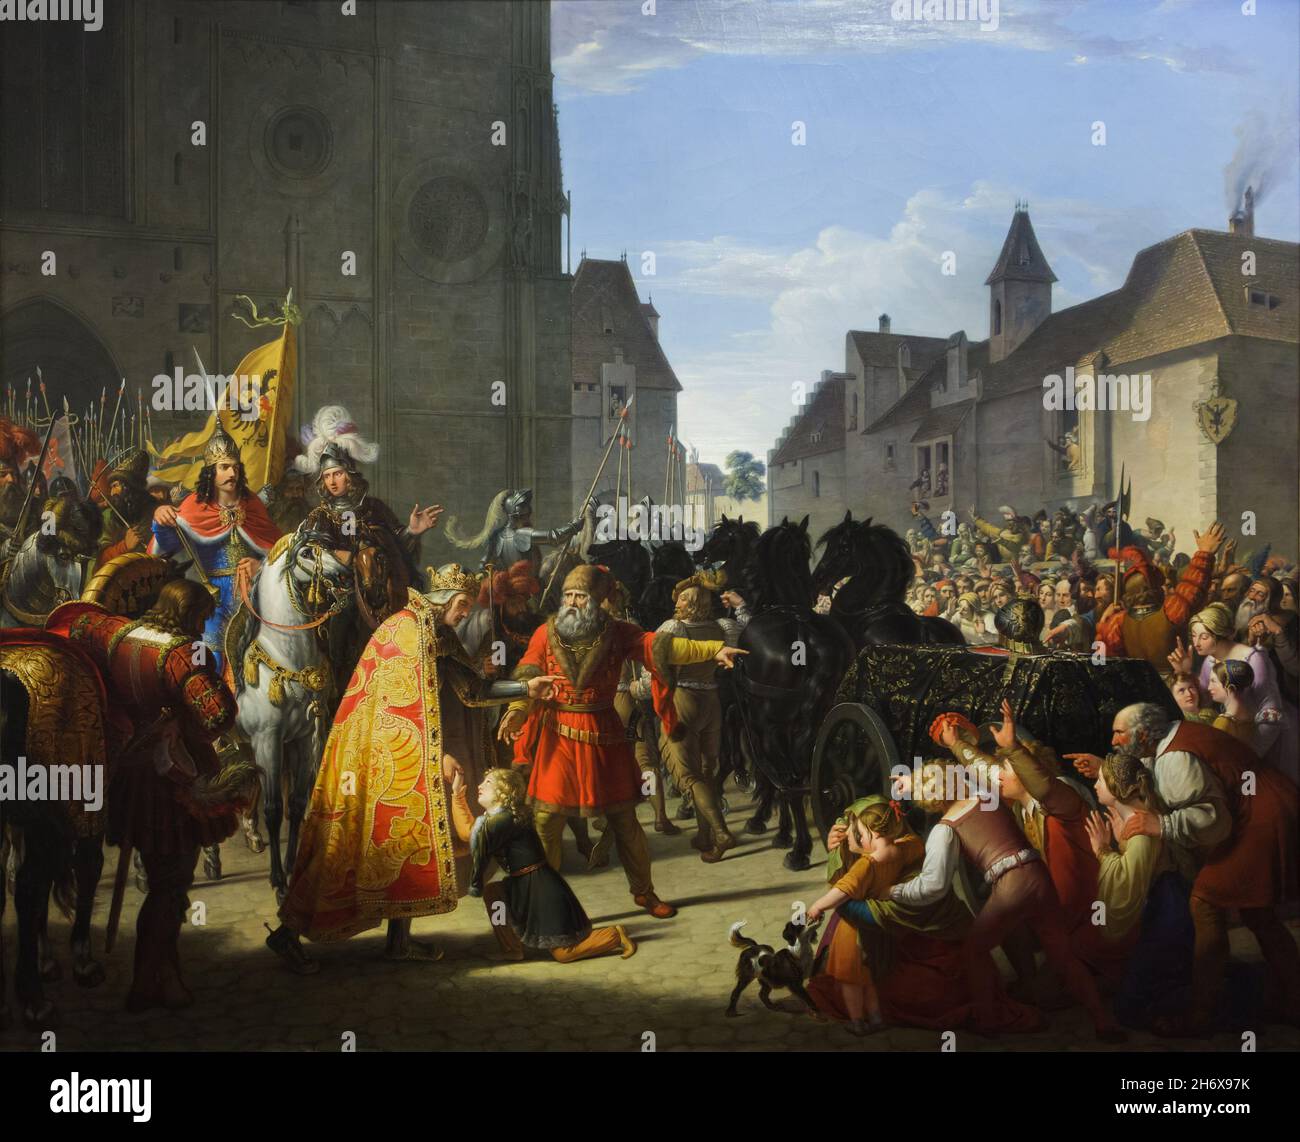 Painting 'Wenceslas asks Rudolf of Habsburg for the body of his father King Ottokar II of Bohemia' by Austrian painter Anton Petter (1826) on display in the Belvedere Museum in Vienna, Austria. The scene takes place in Vienna in front of Saint Stephen Cathedral (Stephansdom). Stock Photo